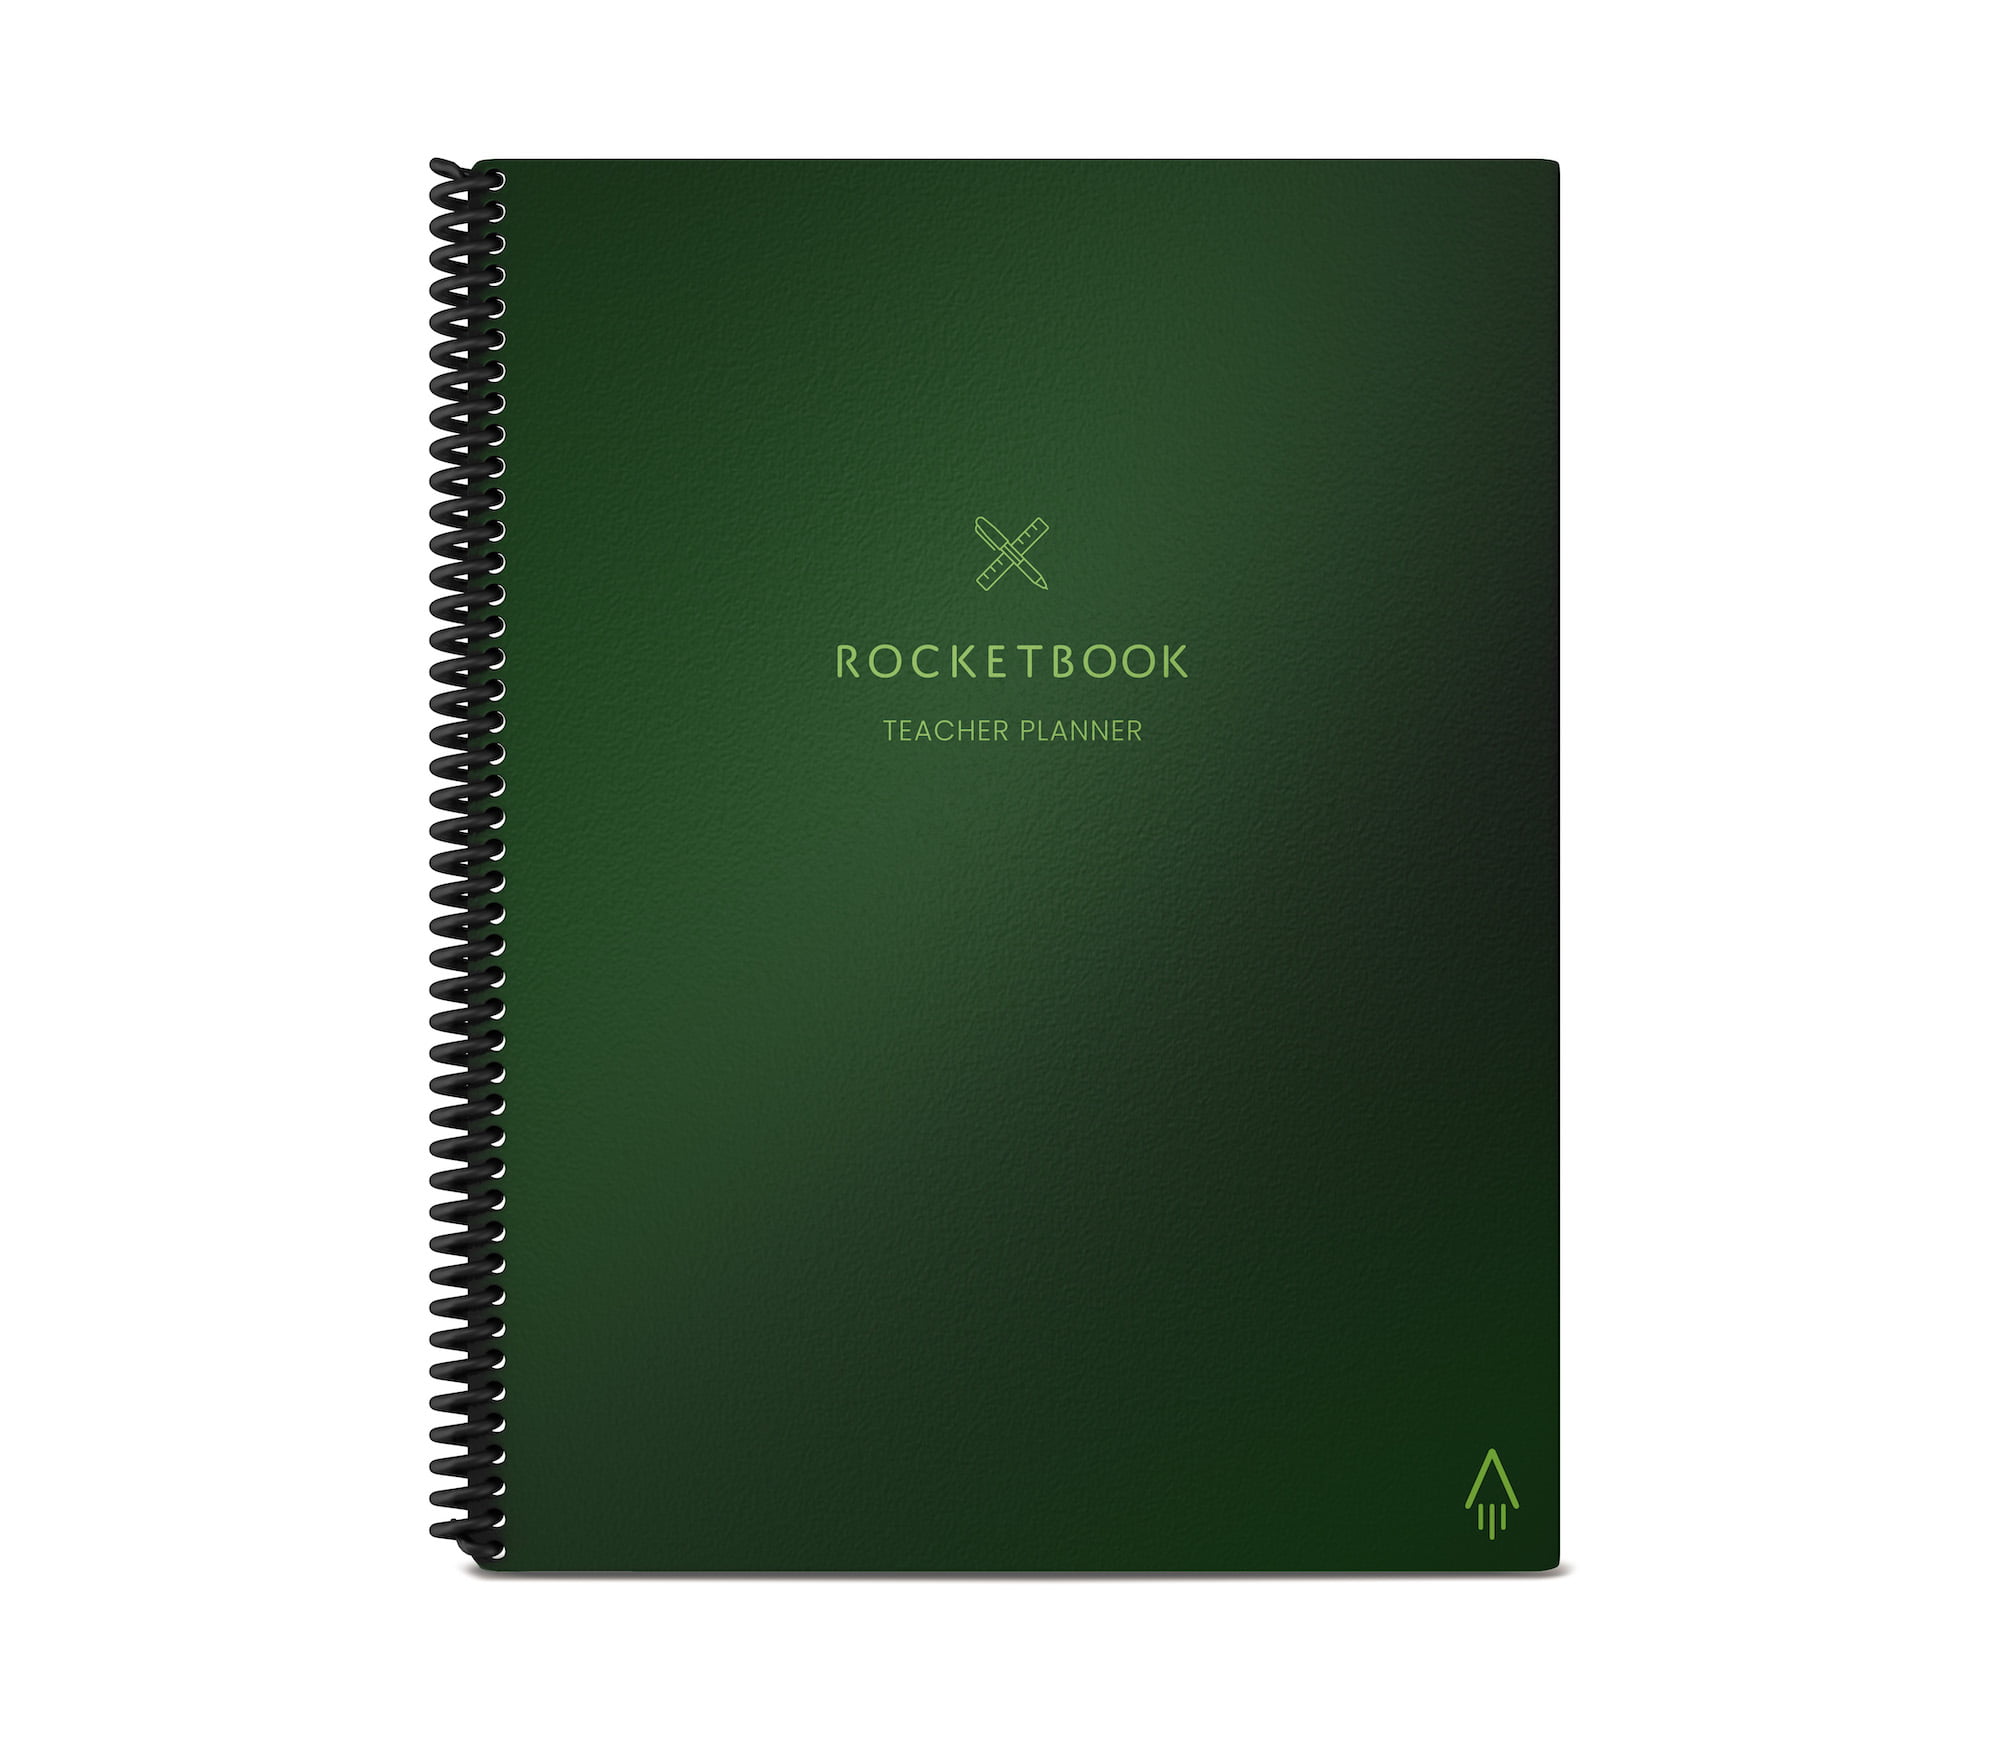 Rocketbook Review for Teachers